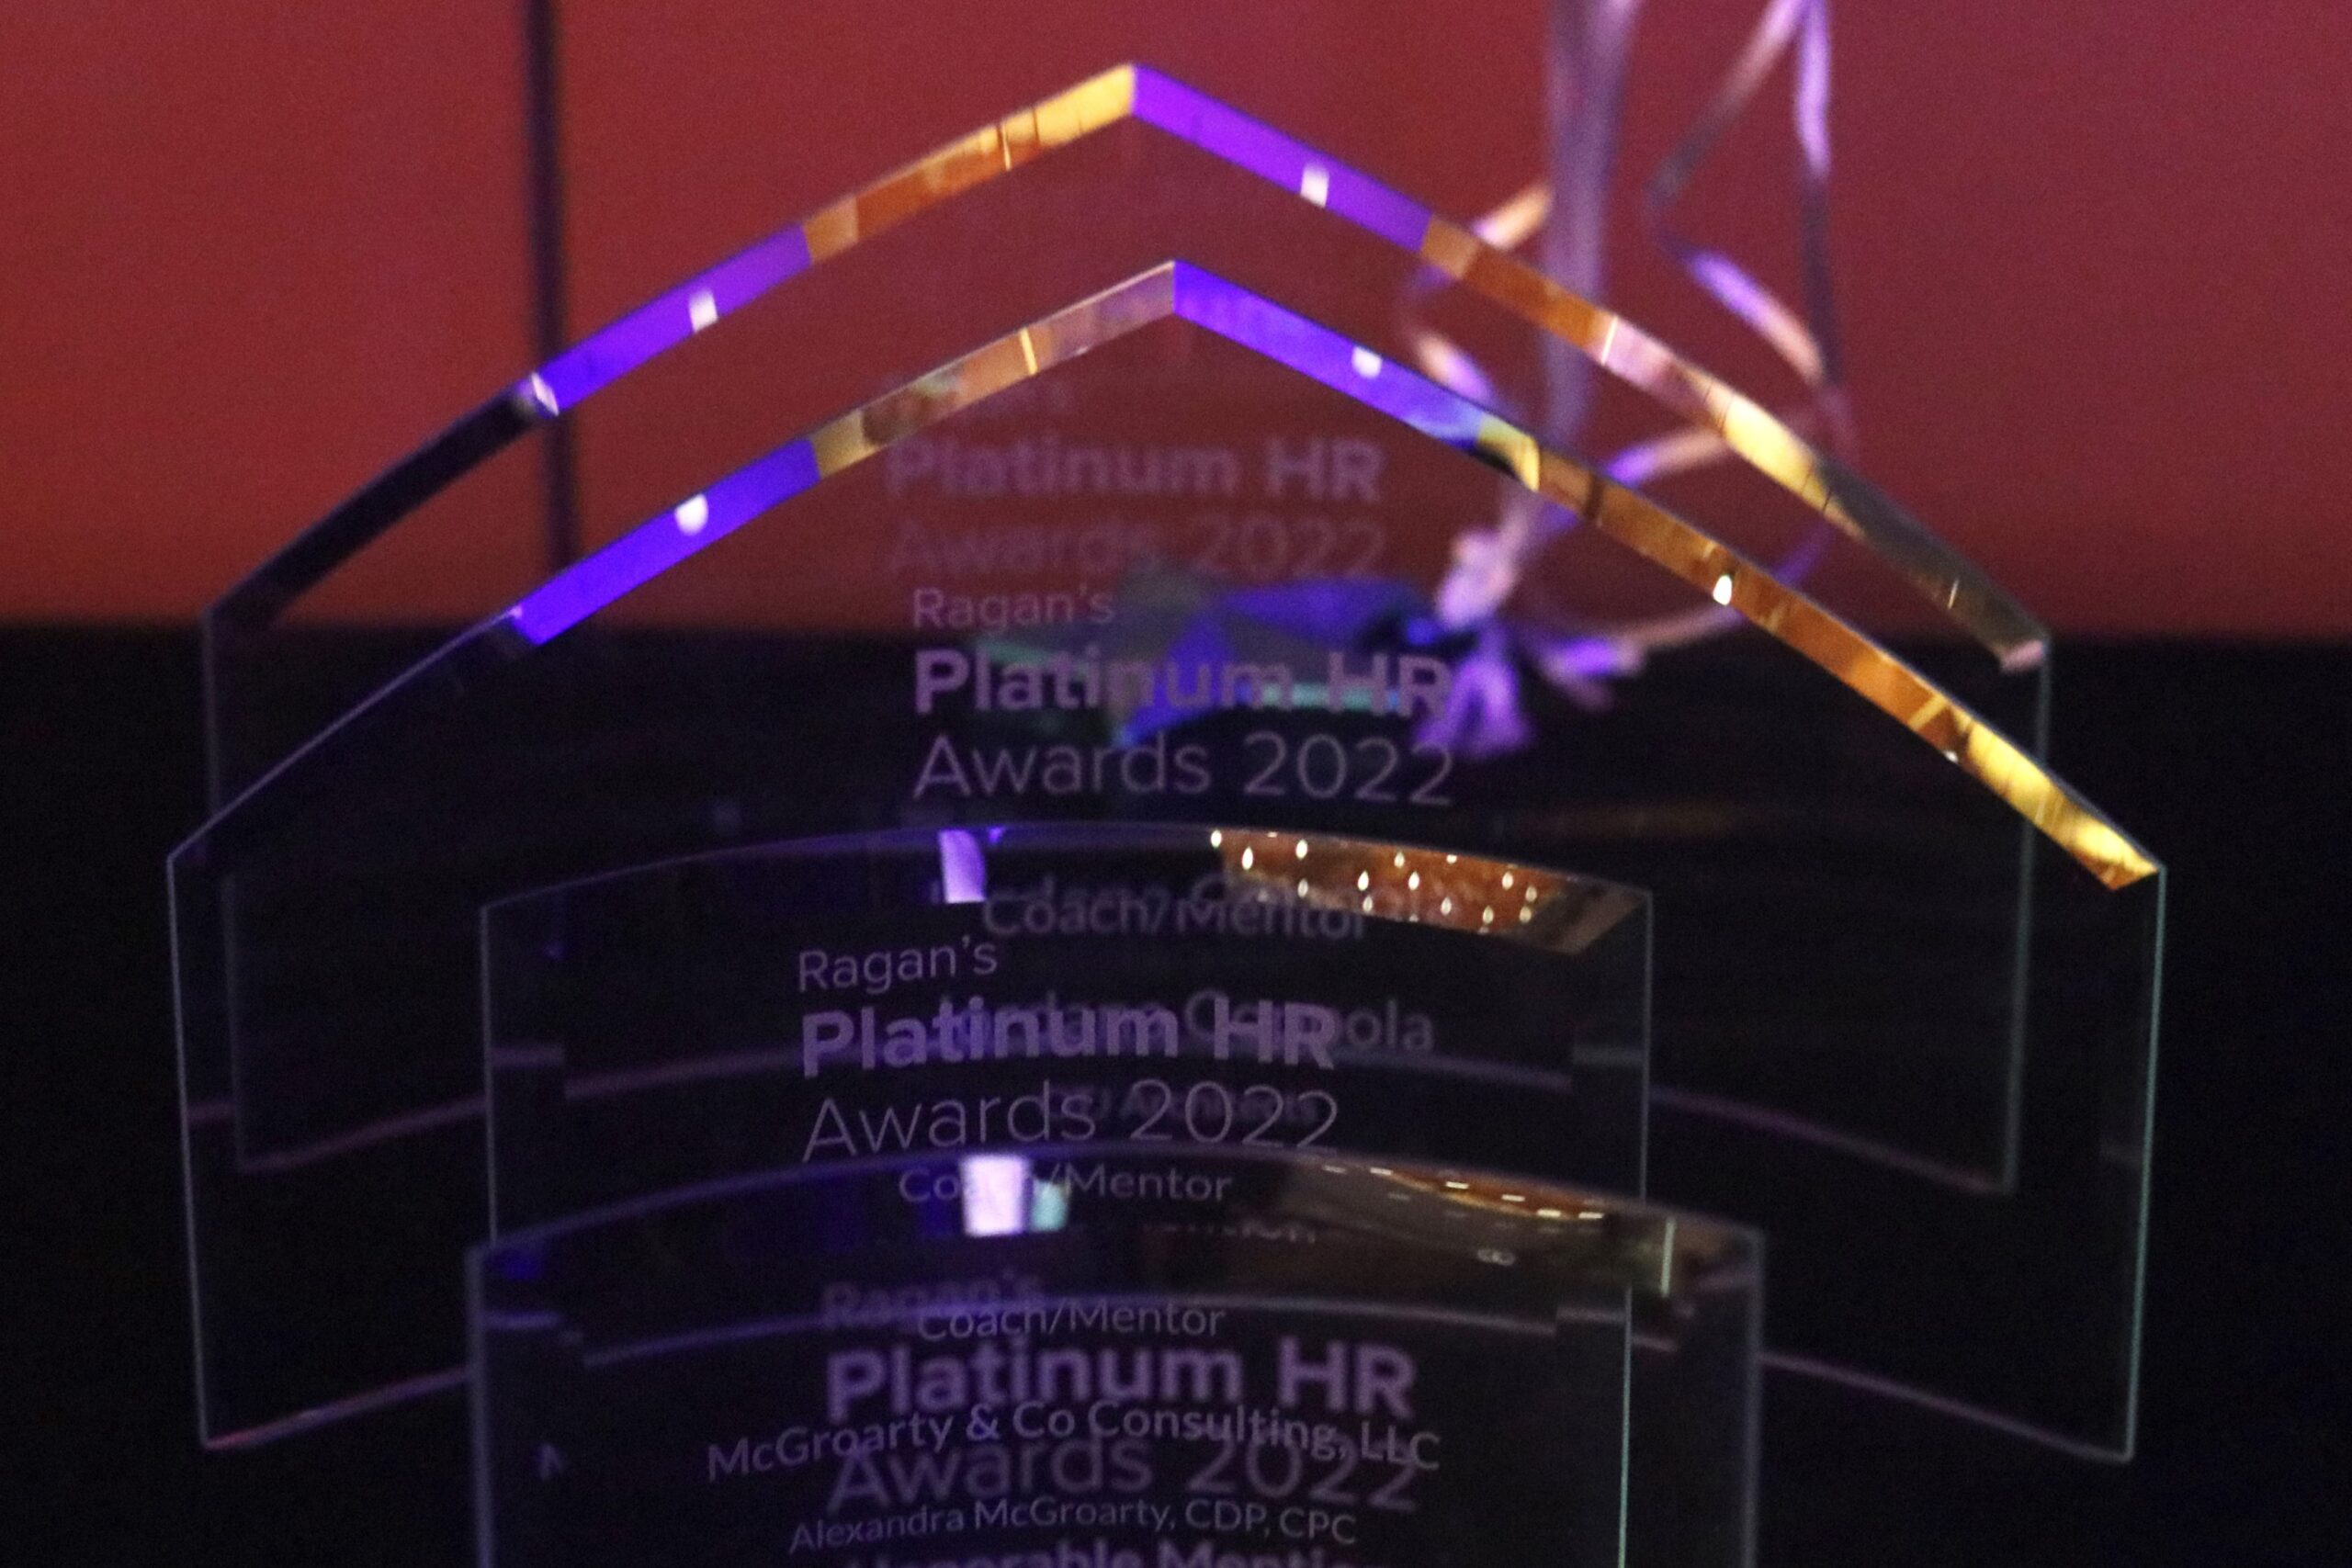 Ragan is honored to announce the winners of our 2022 Platinum HR Awards